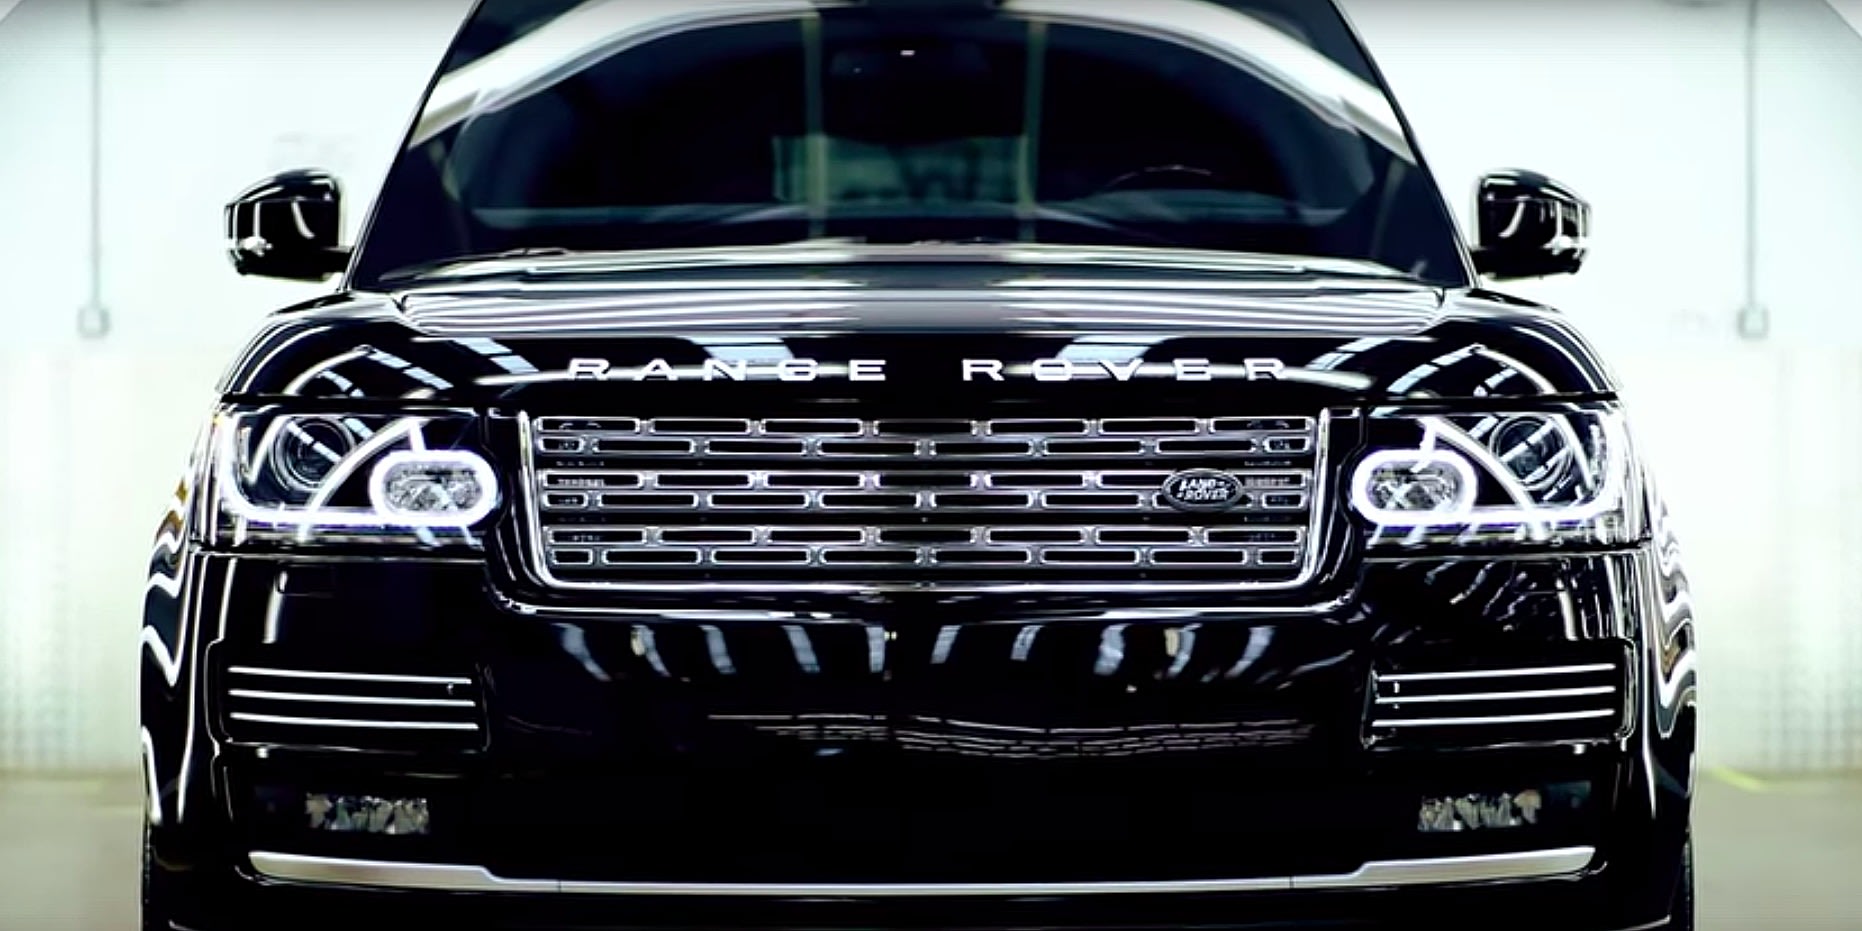 Land Rover's new bulletproof SUV is a tank dressed in a tuxedo